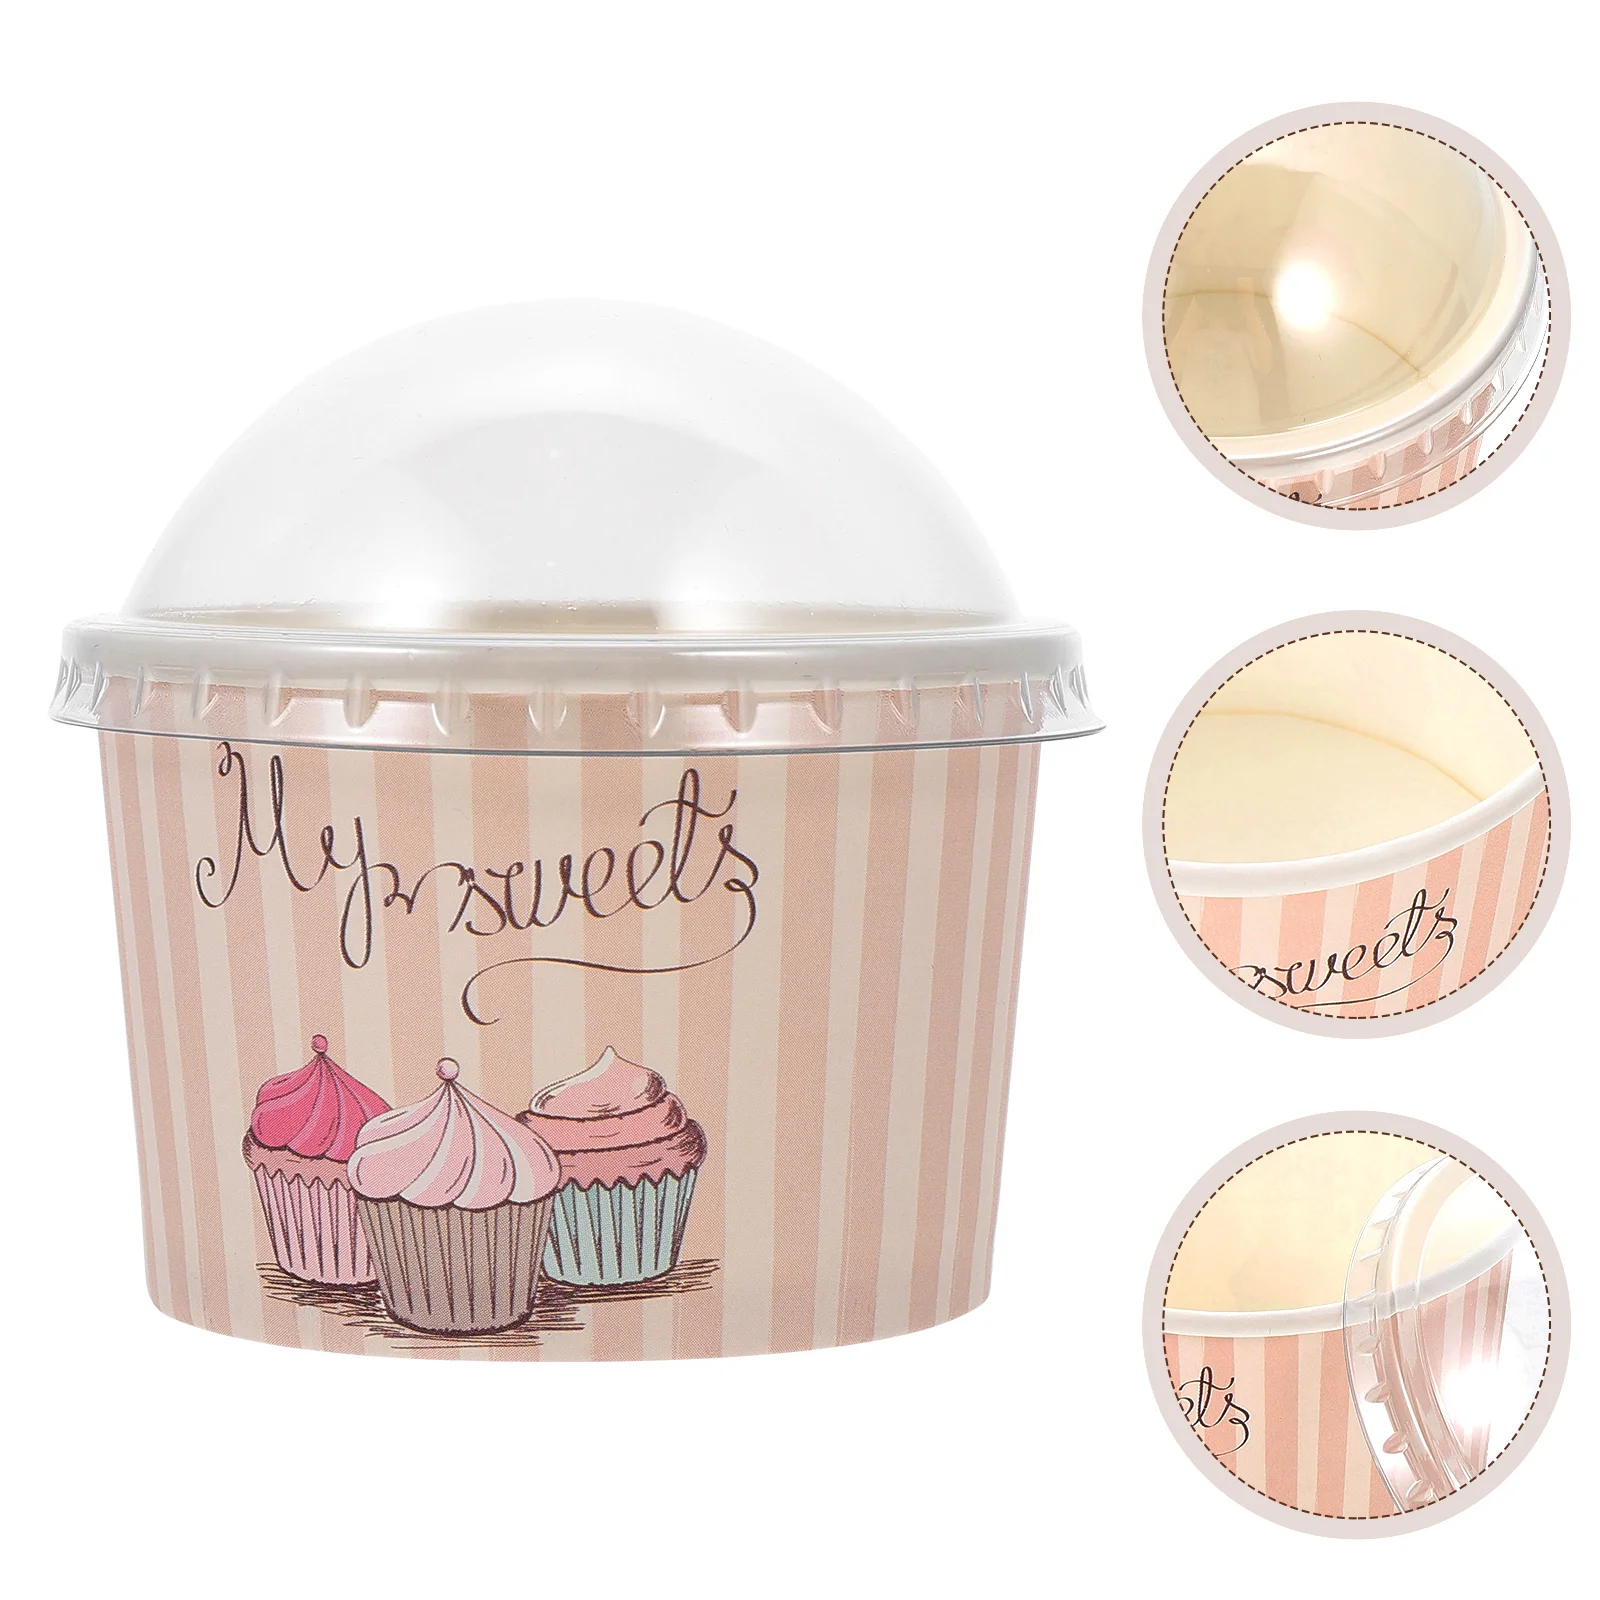 

Paper Cup Cups Ice Cream Dessert Yogurt Bowl Bowls Cake Sundae Disposable Pudding Container Treat Lids Containers Lid Party Food